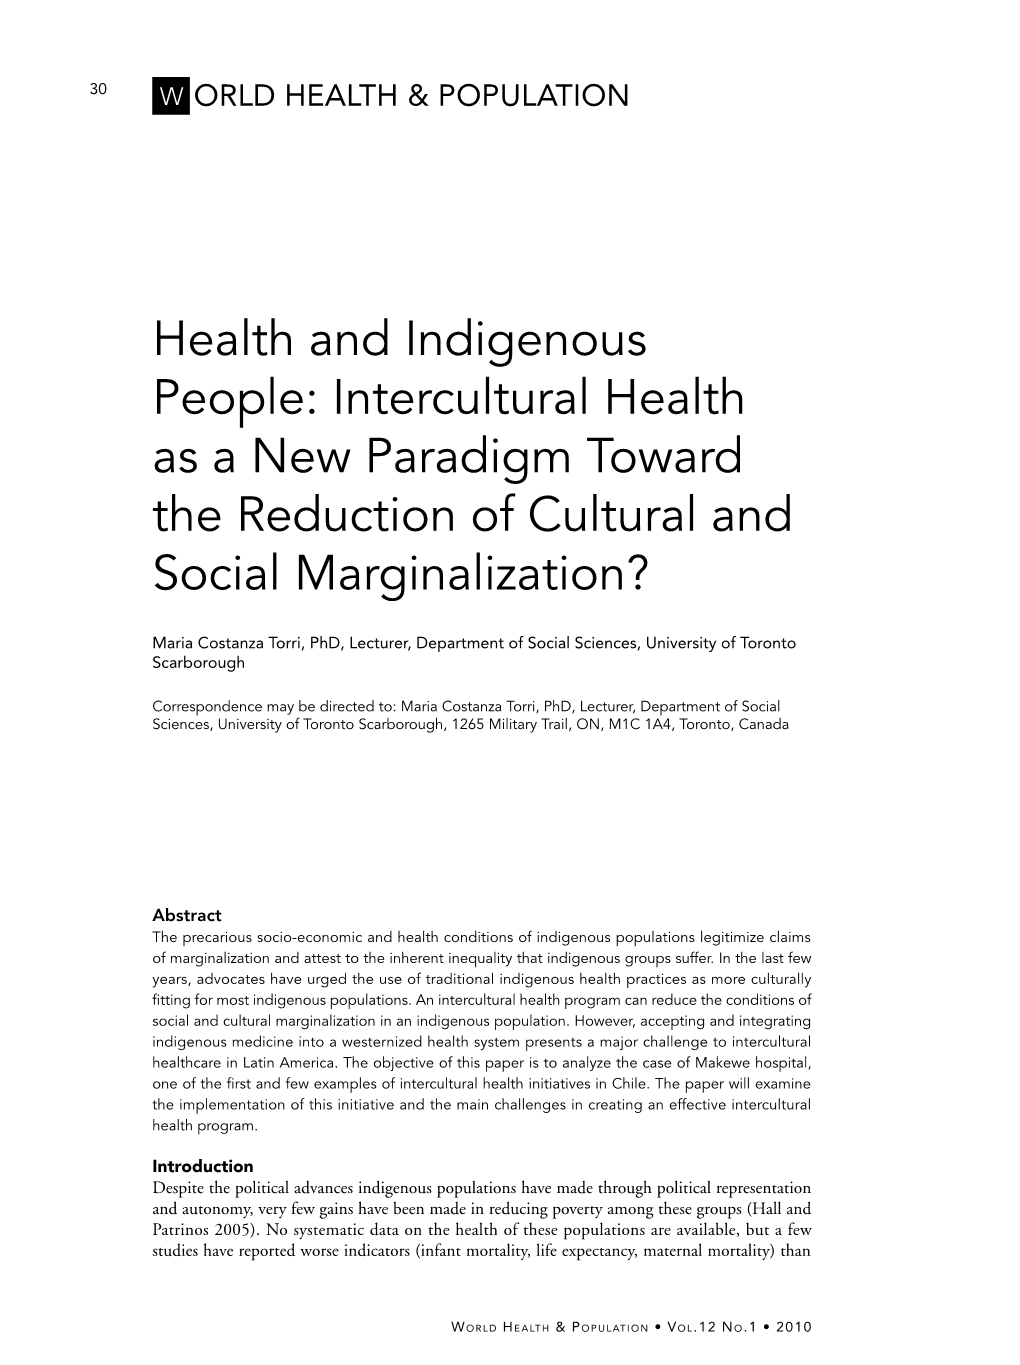 Health and Indigenous People: Intercultural Health As a New Paradigm Toward the Reduction of Cultural and Social Marginalization?